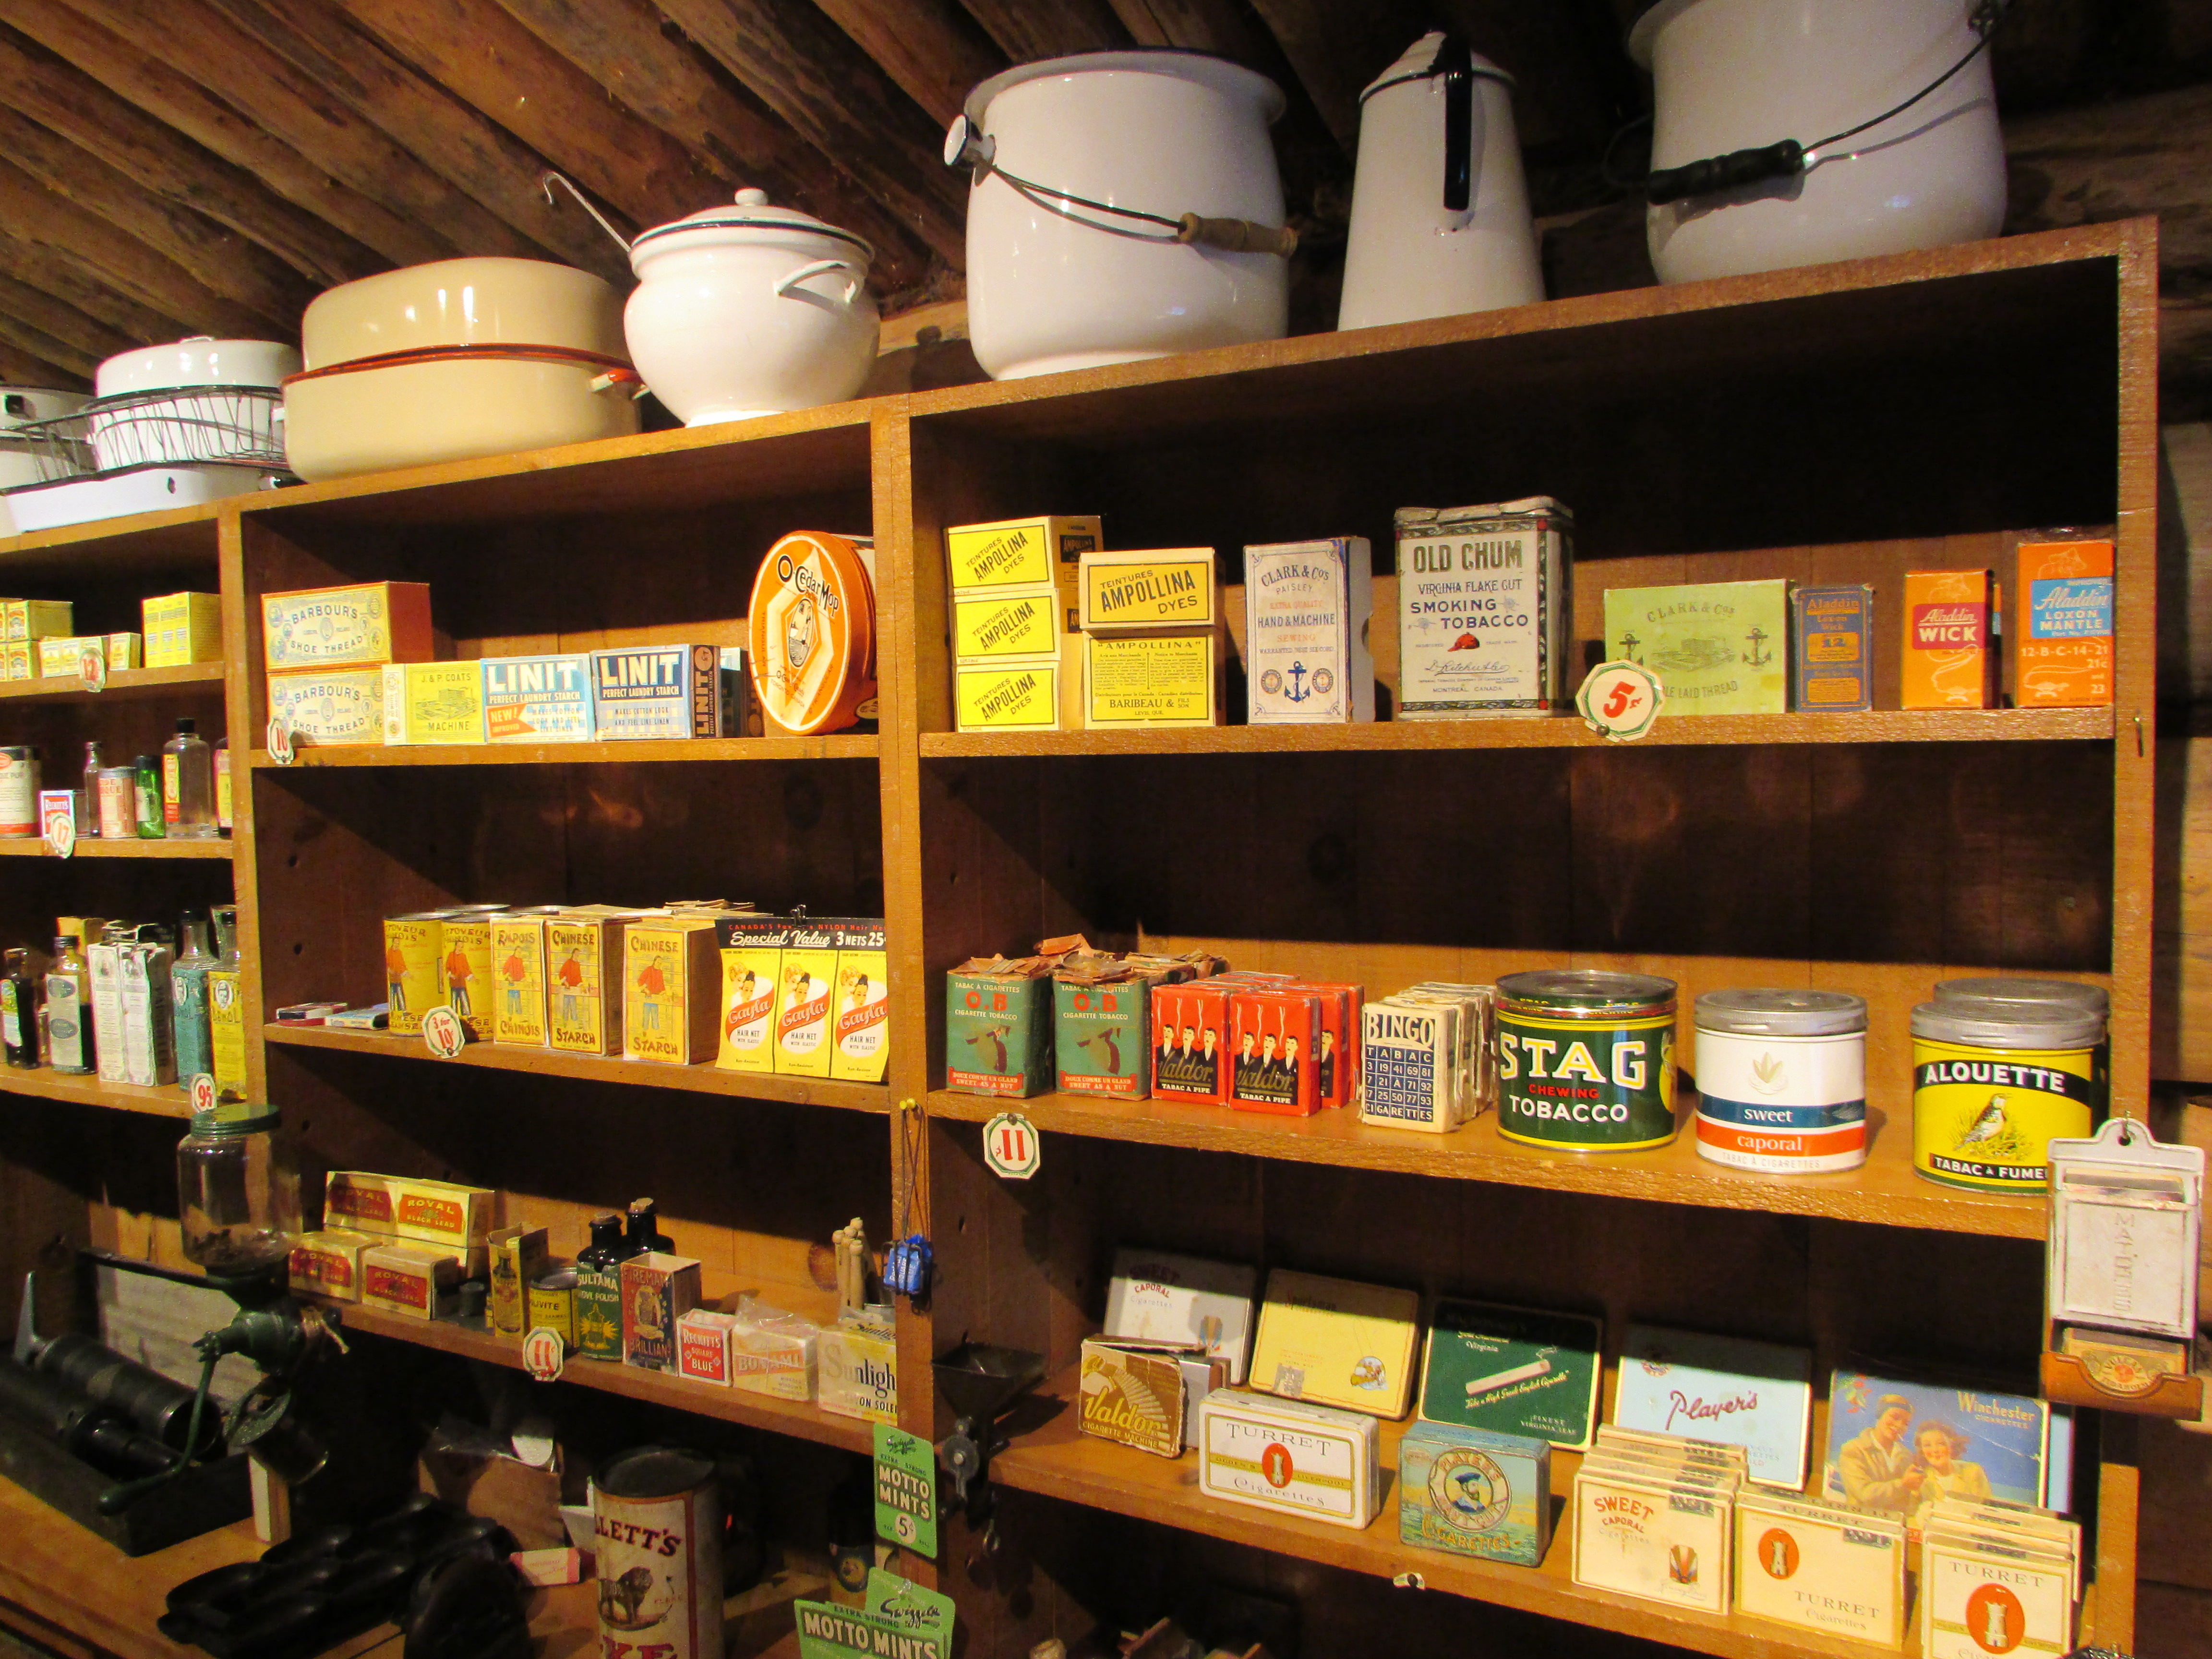 Colour photograph of three shelves filled with products from the 1920s.